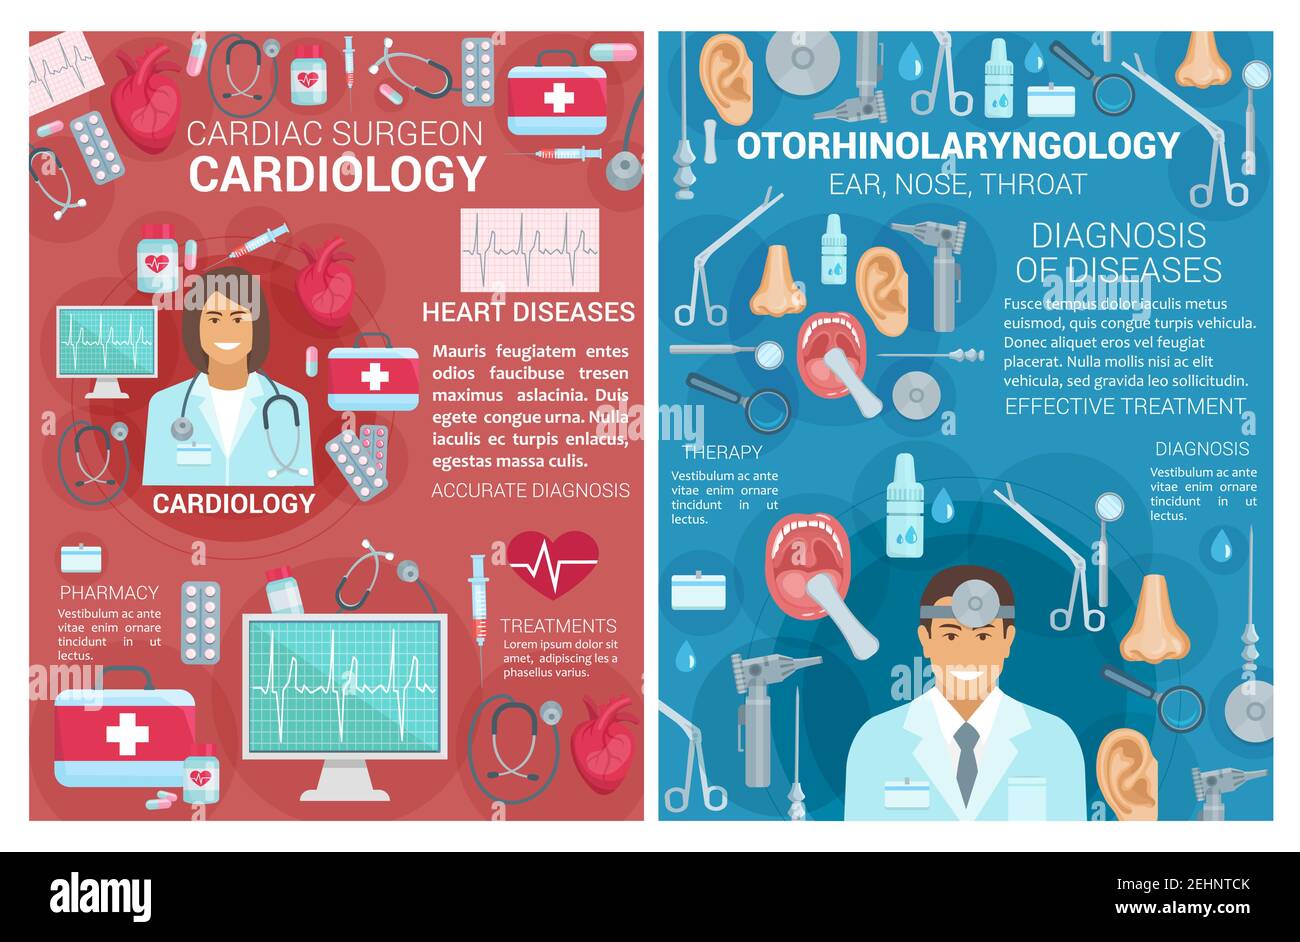 Cardiology and otorhinolaryngology medical clinic posters. Vector cardiologist surgeon and otolaryngologist doctors with cardiac surgery and heart dis Stock Vector